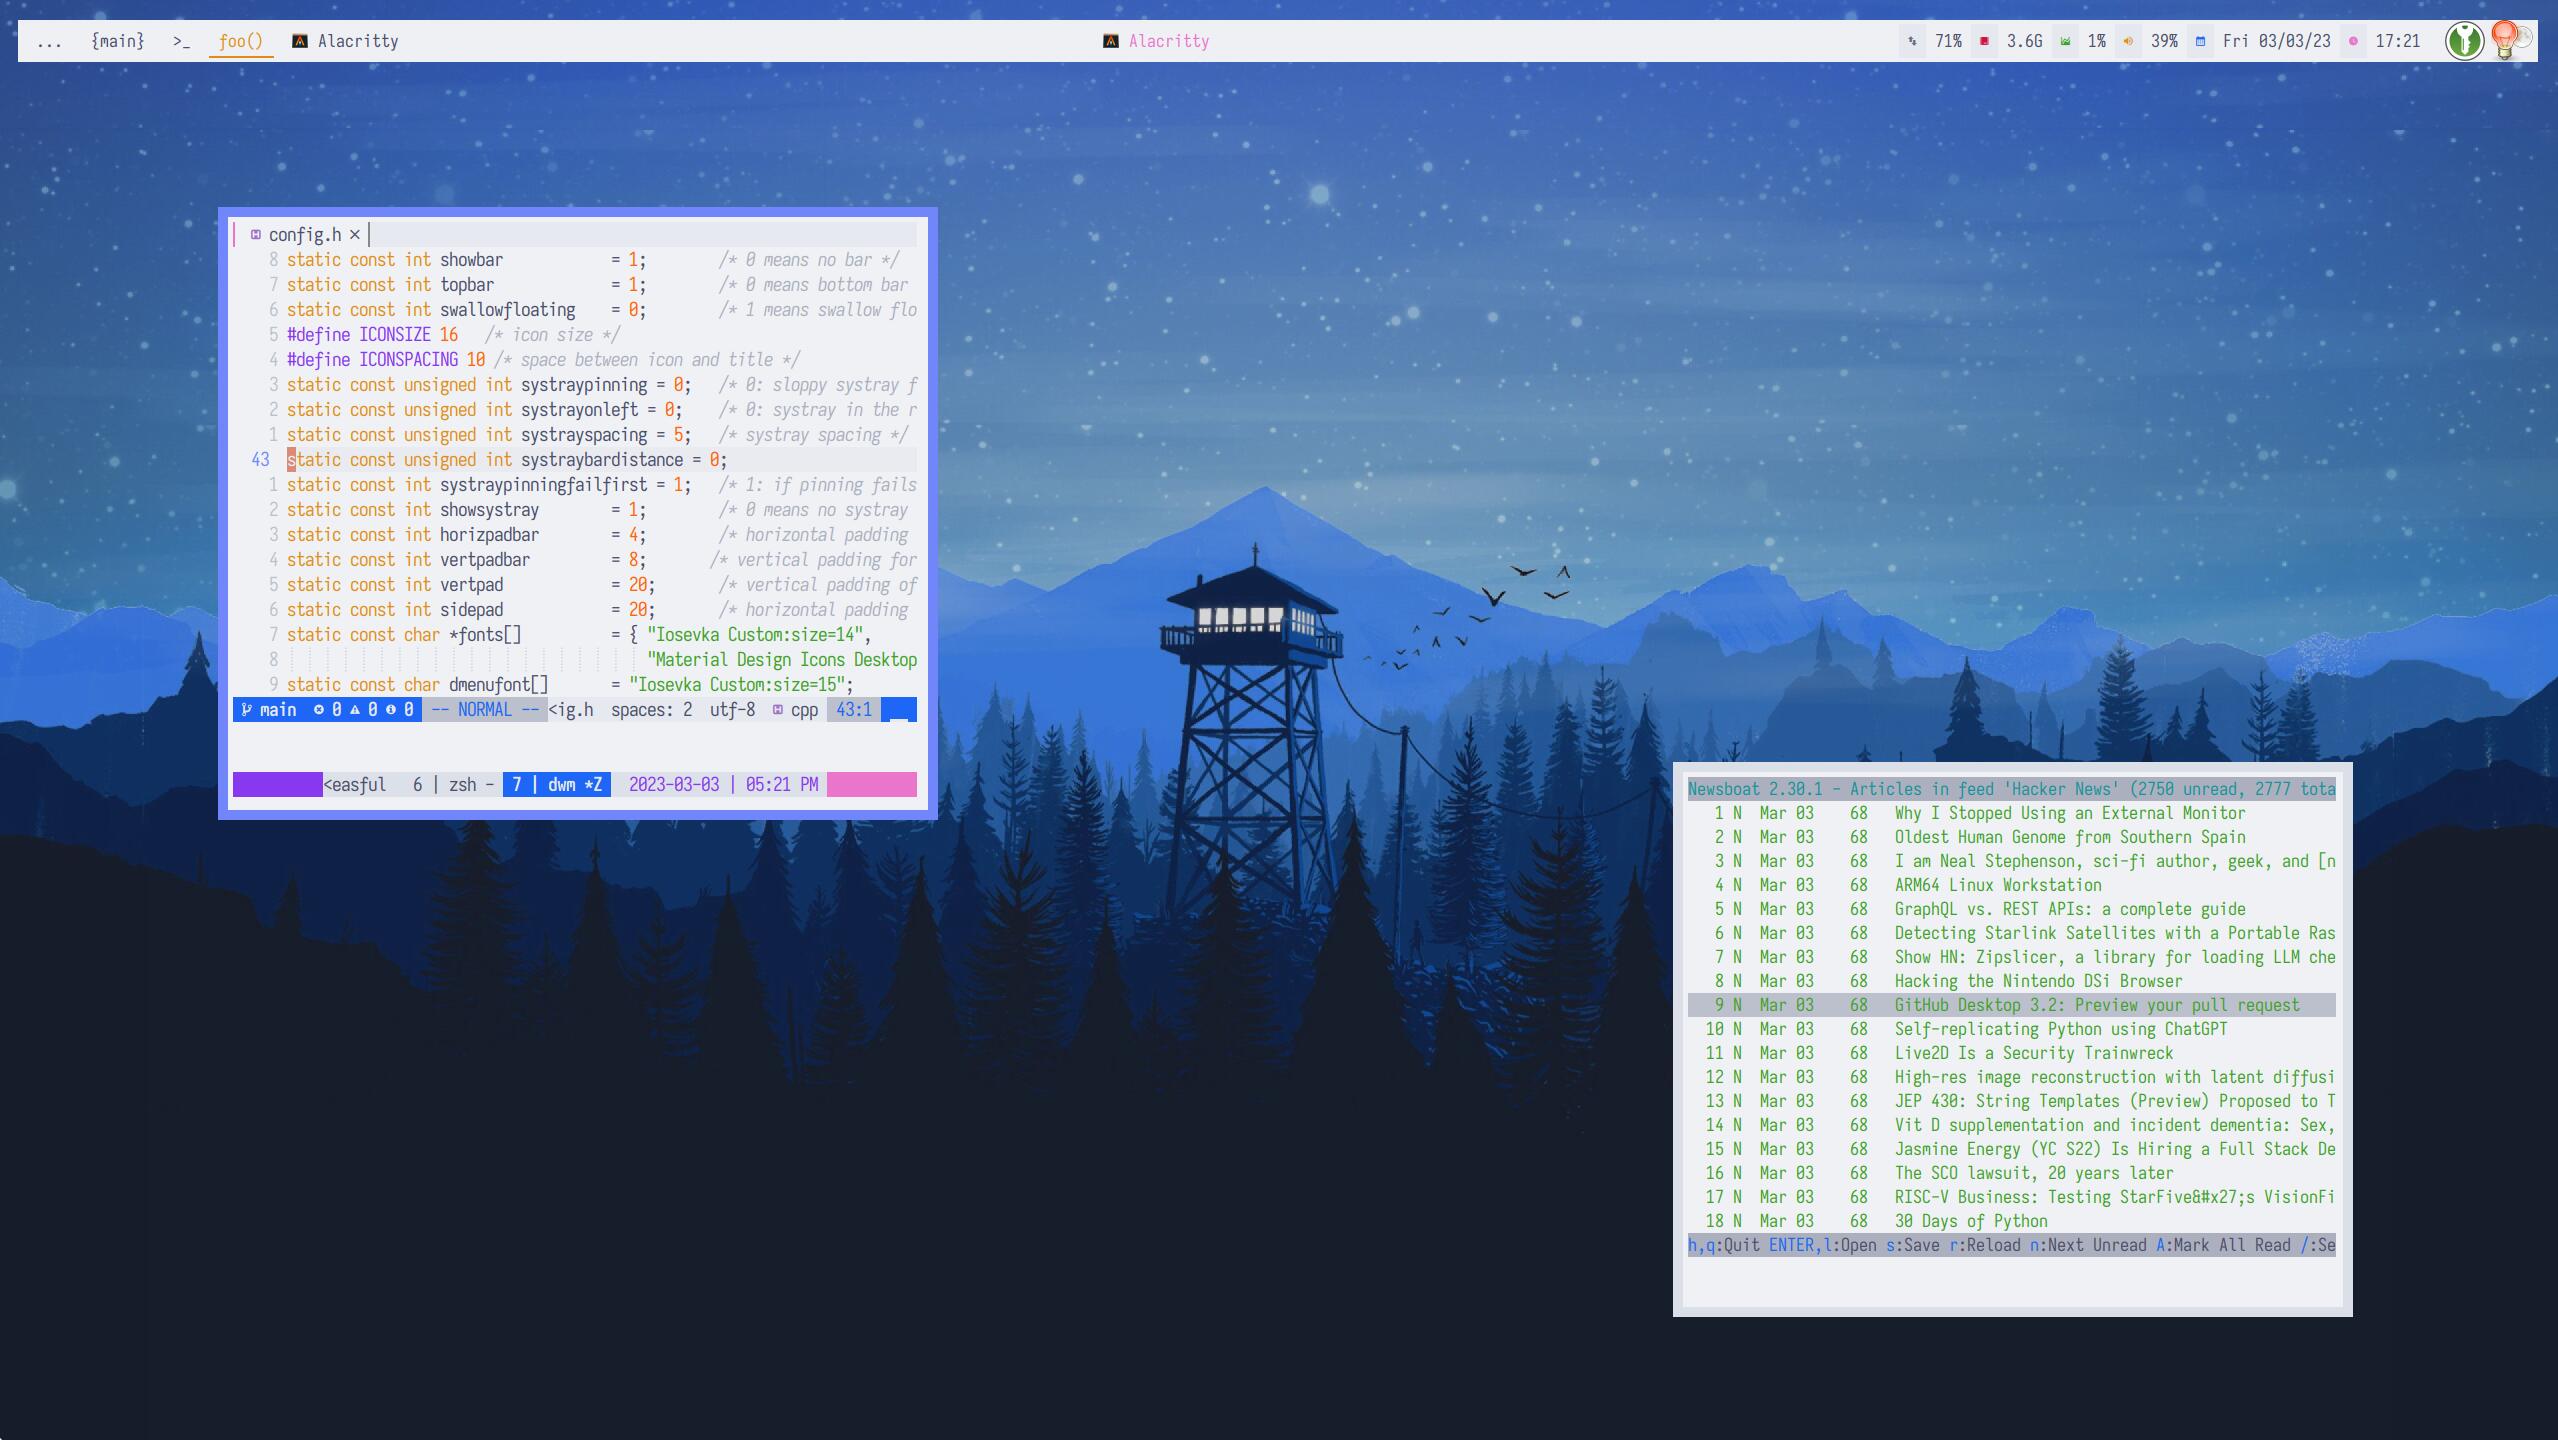 Screenshot of my Linux config